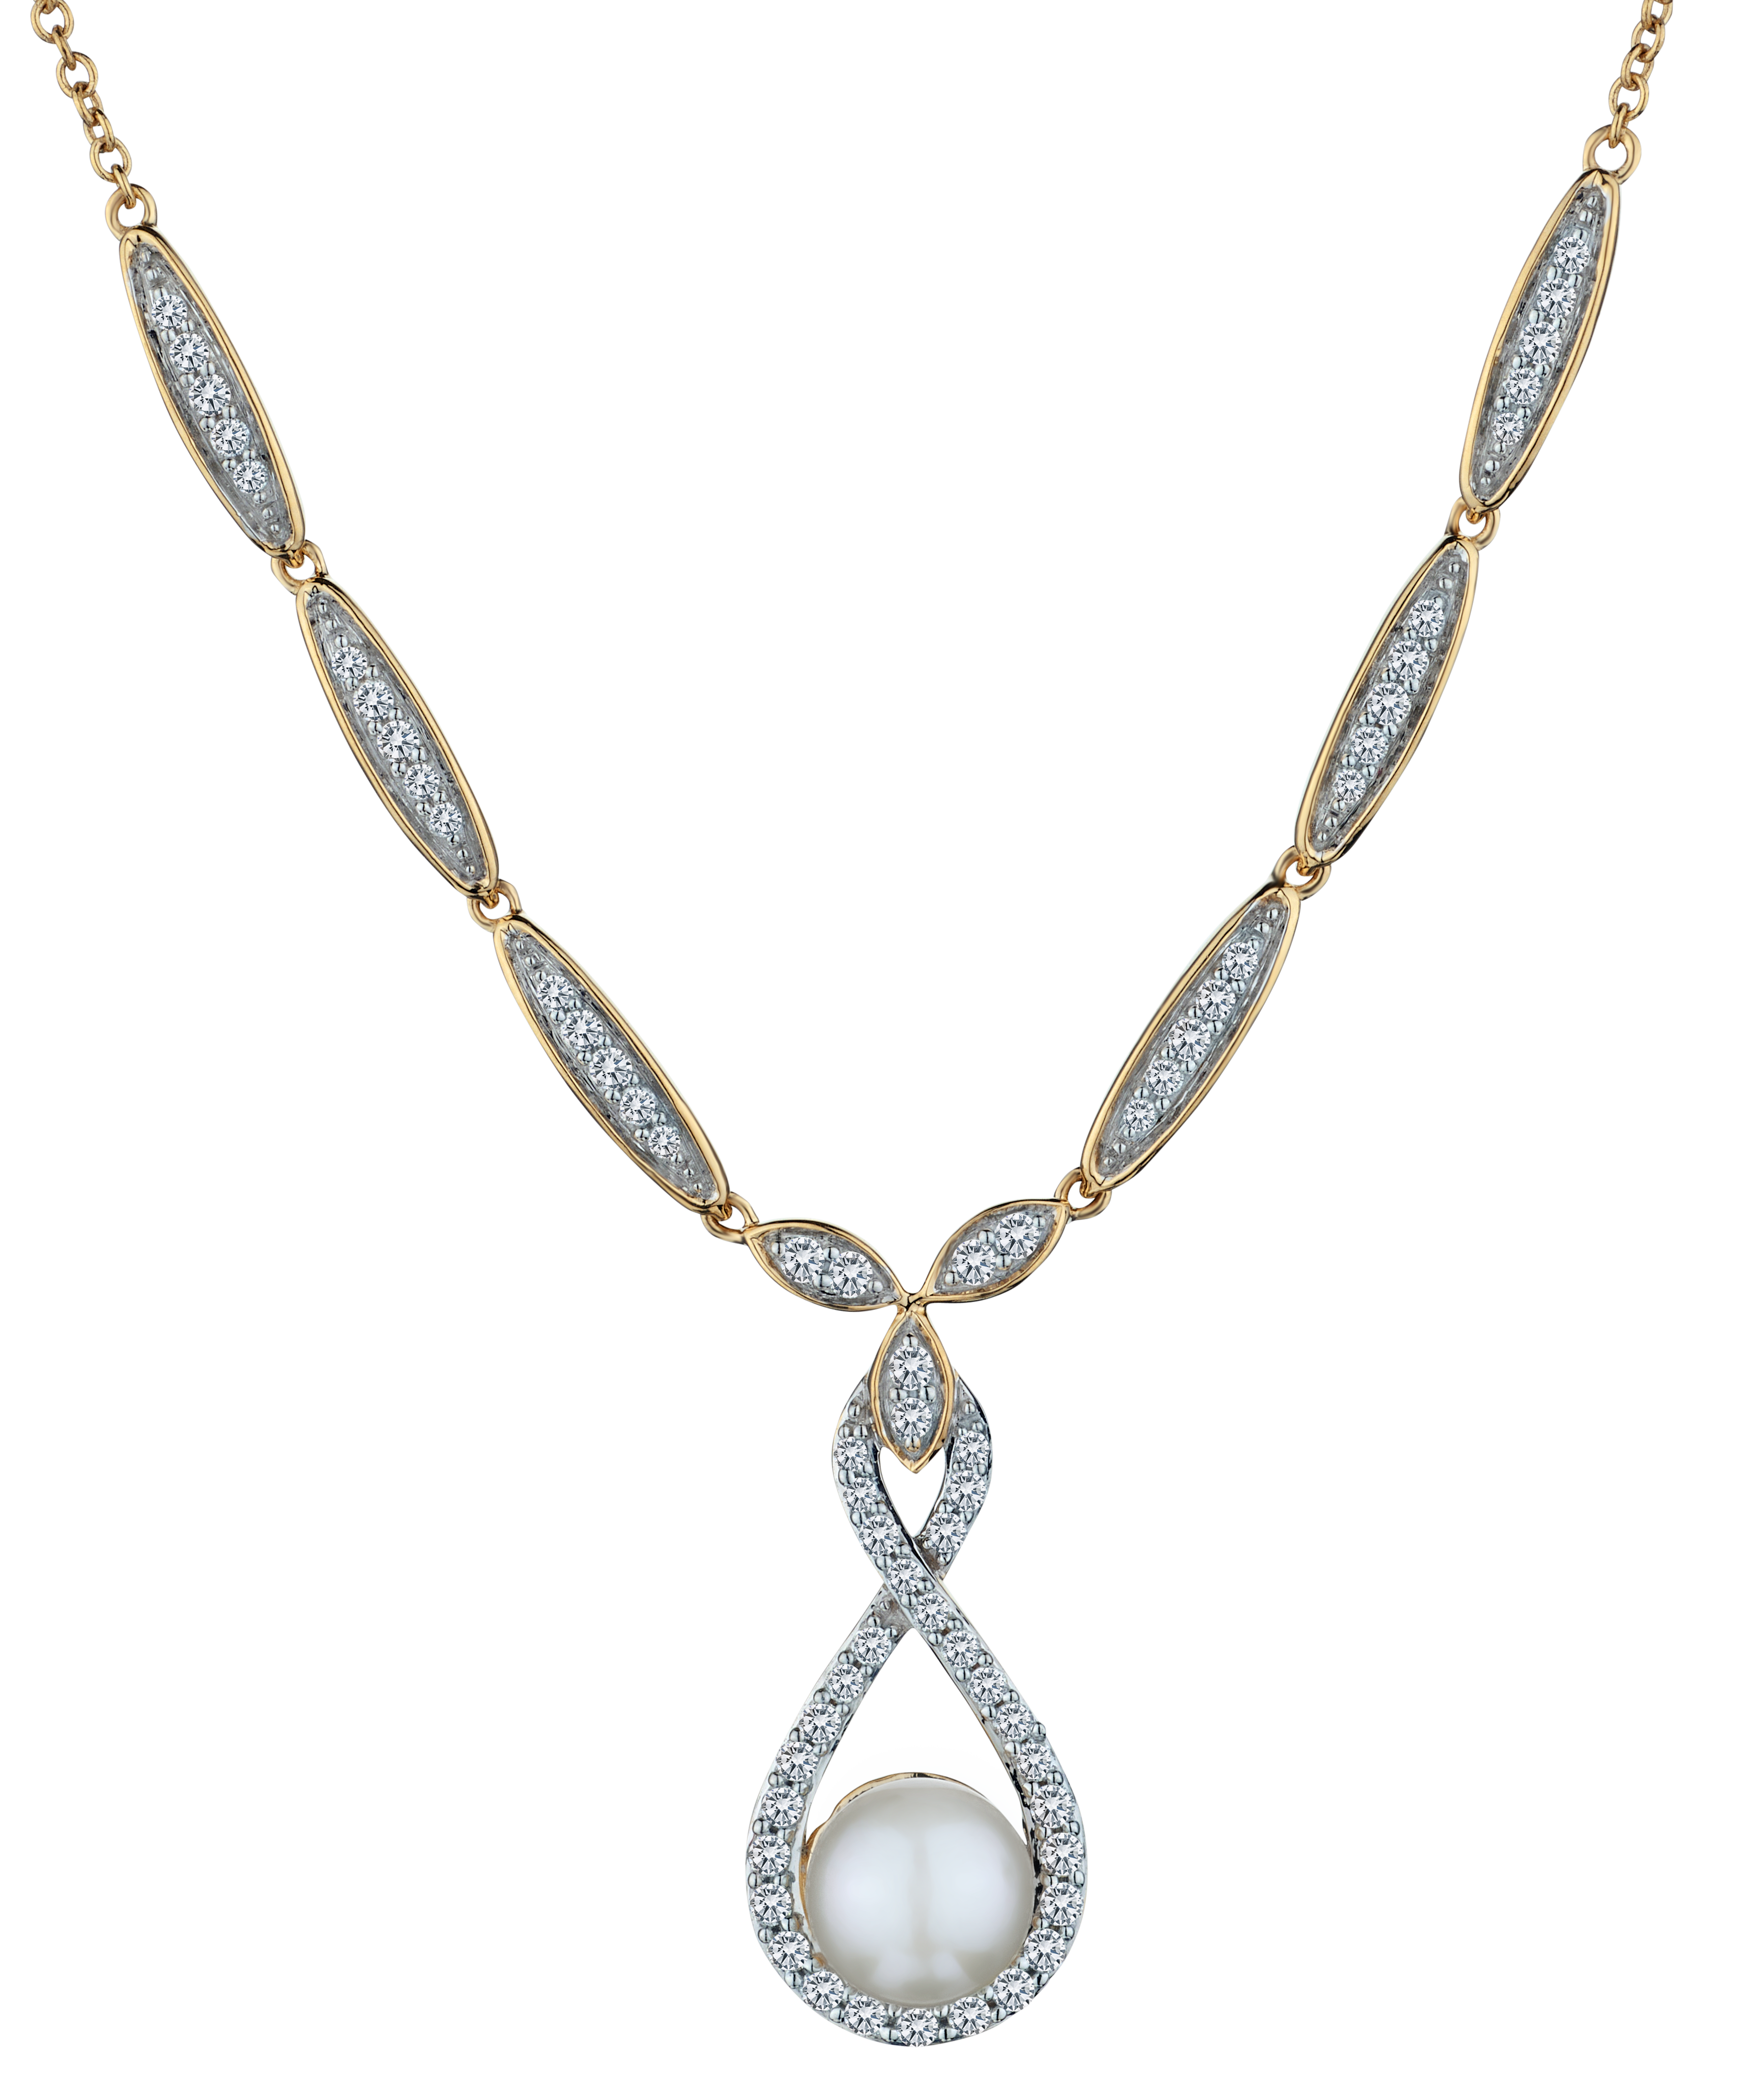 .50 Carat of Diamonds & Pearl Necklace, 14k Yellow Gold.....................NOW